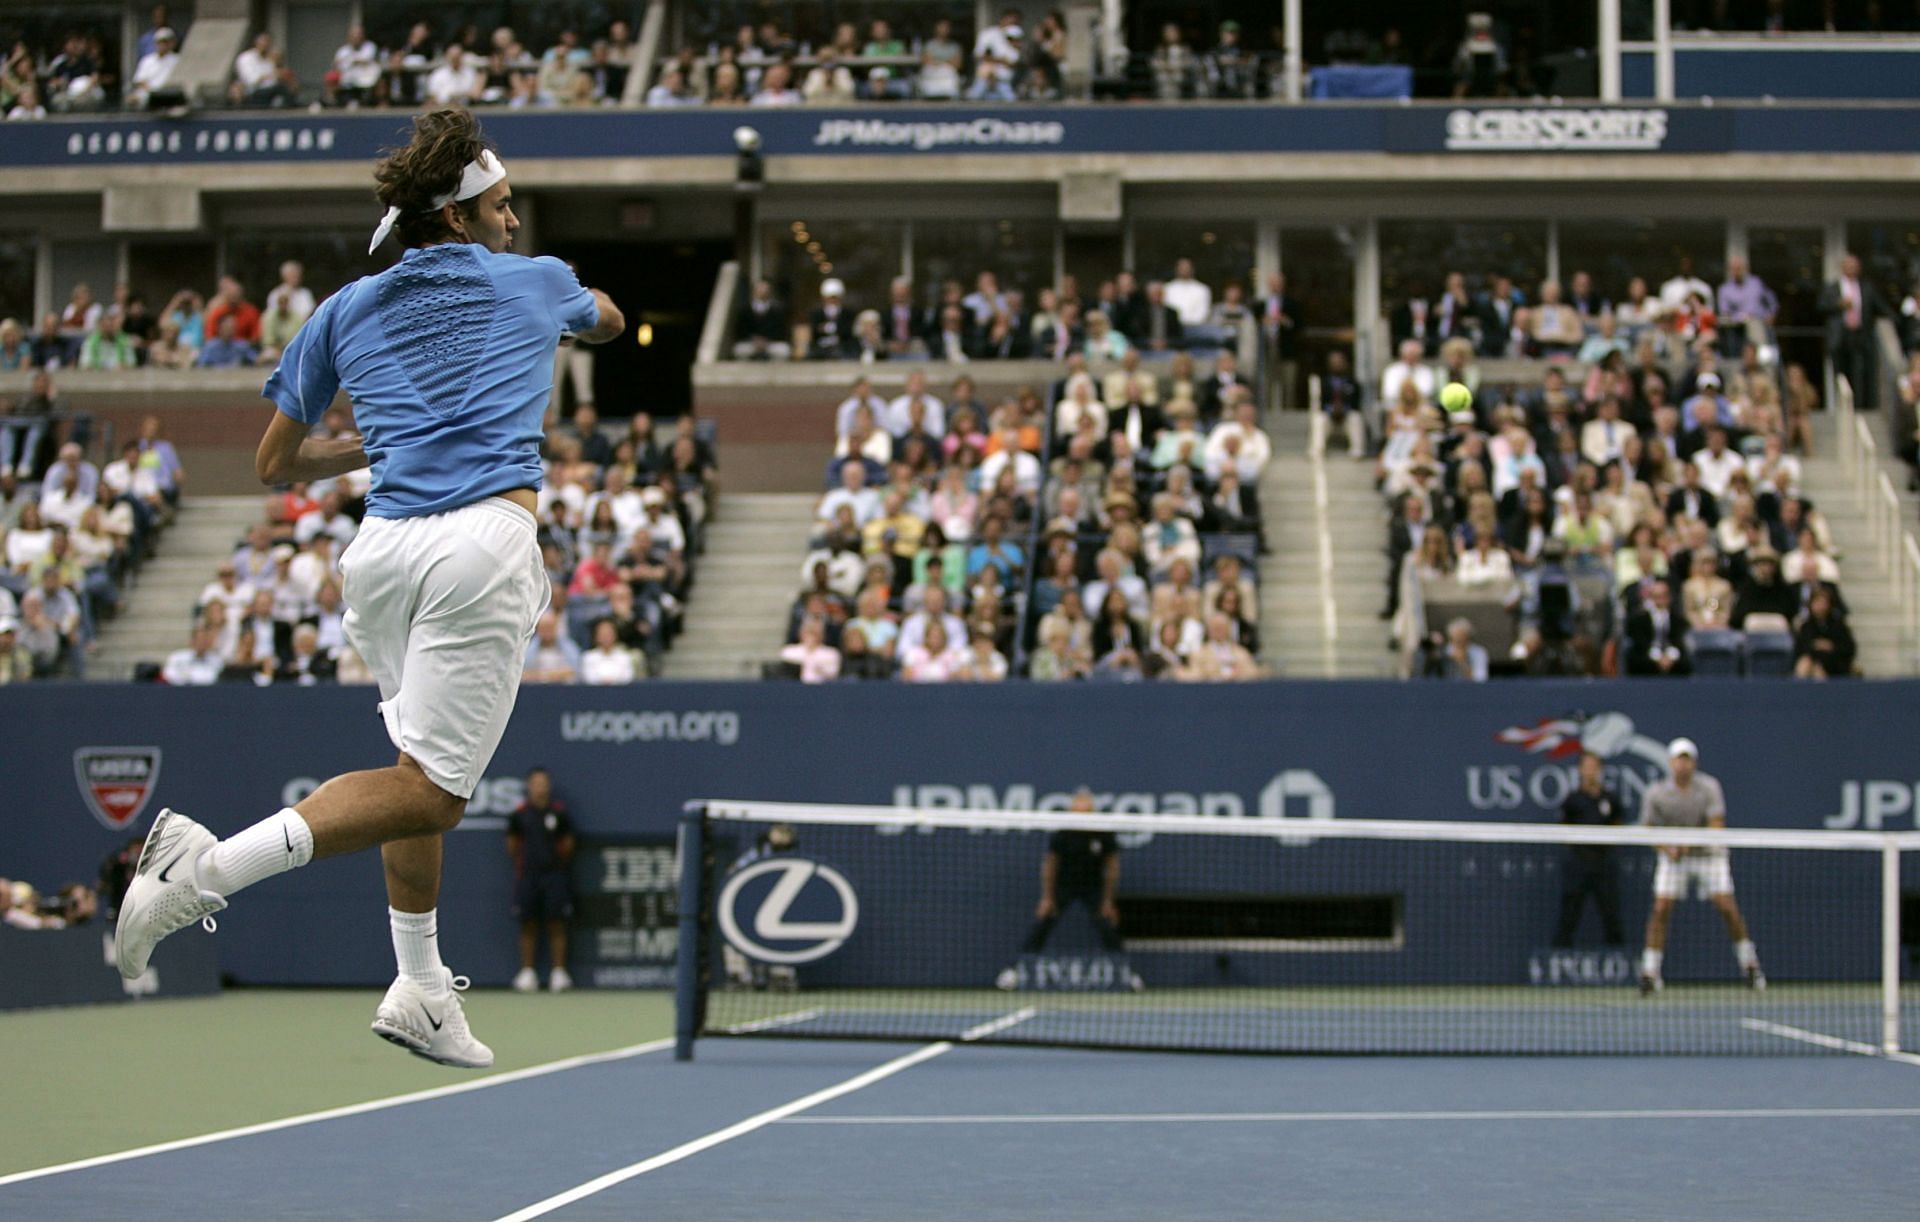 Federer in action at the US Open against Andy Roddick